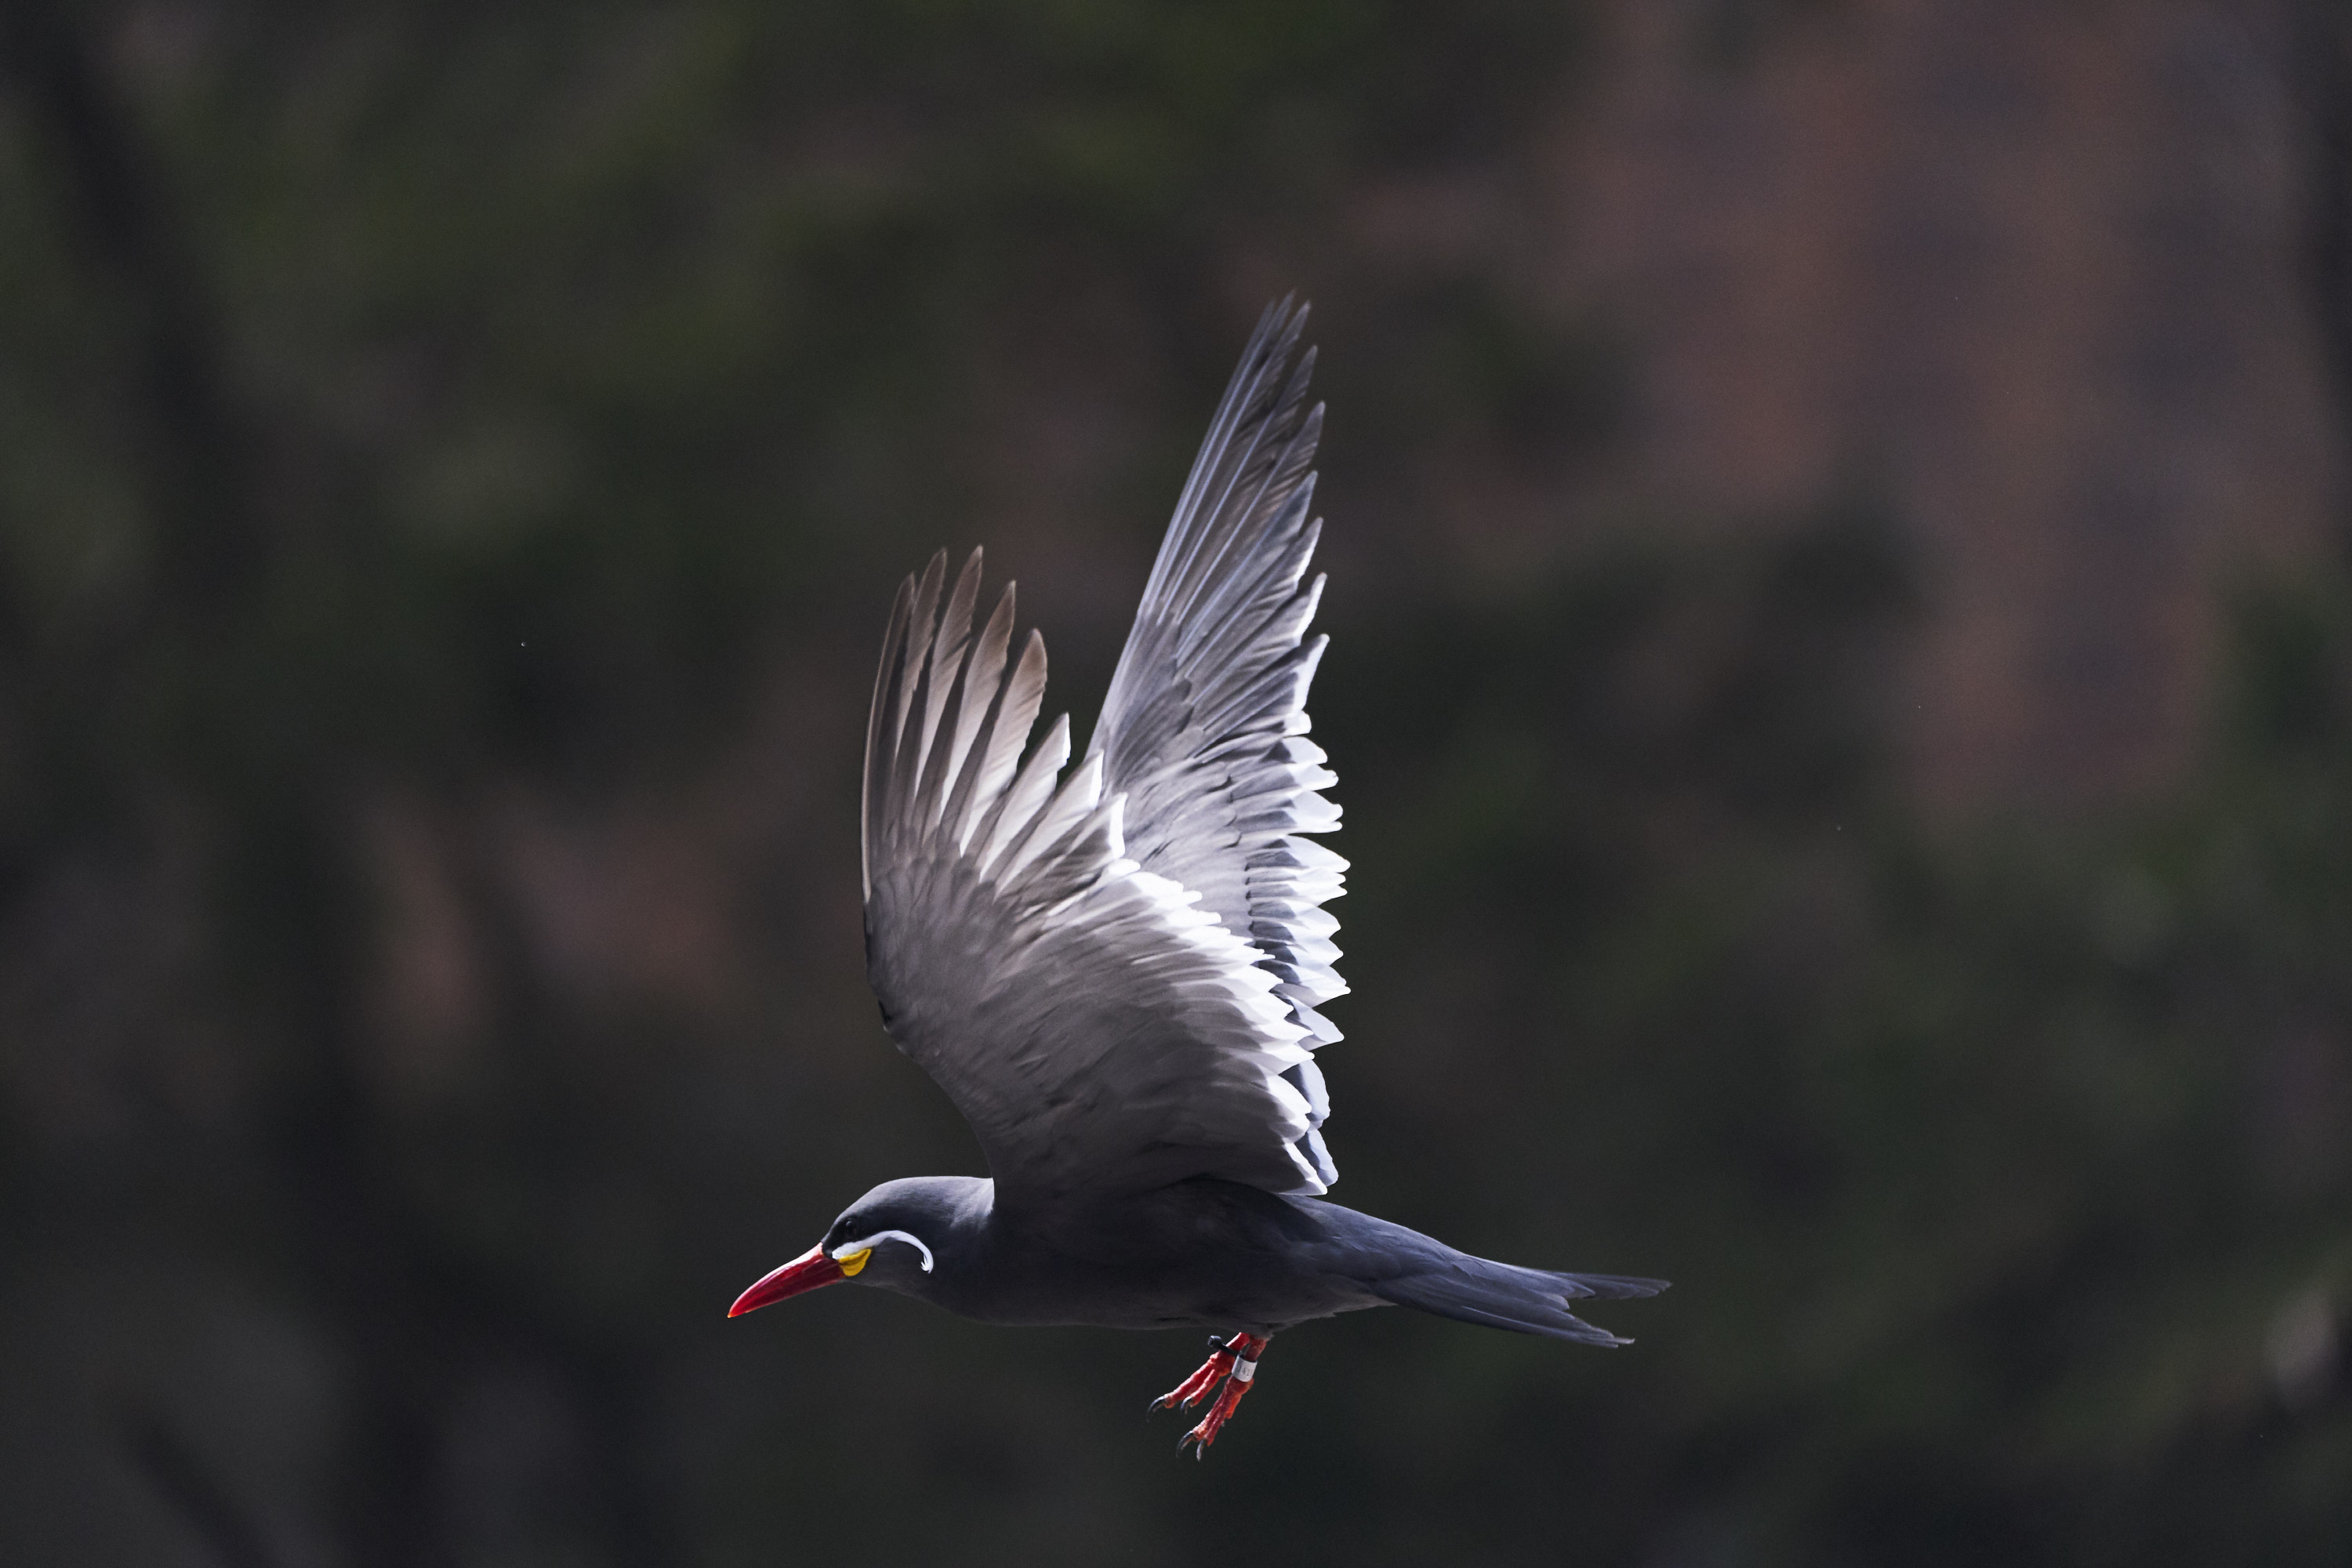 Photography Cheat Sheet: How to Photograph Flying Birds